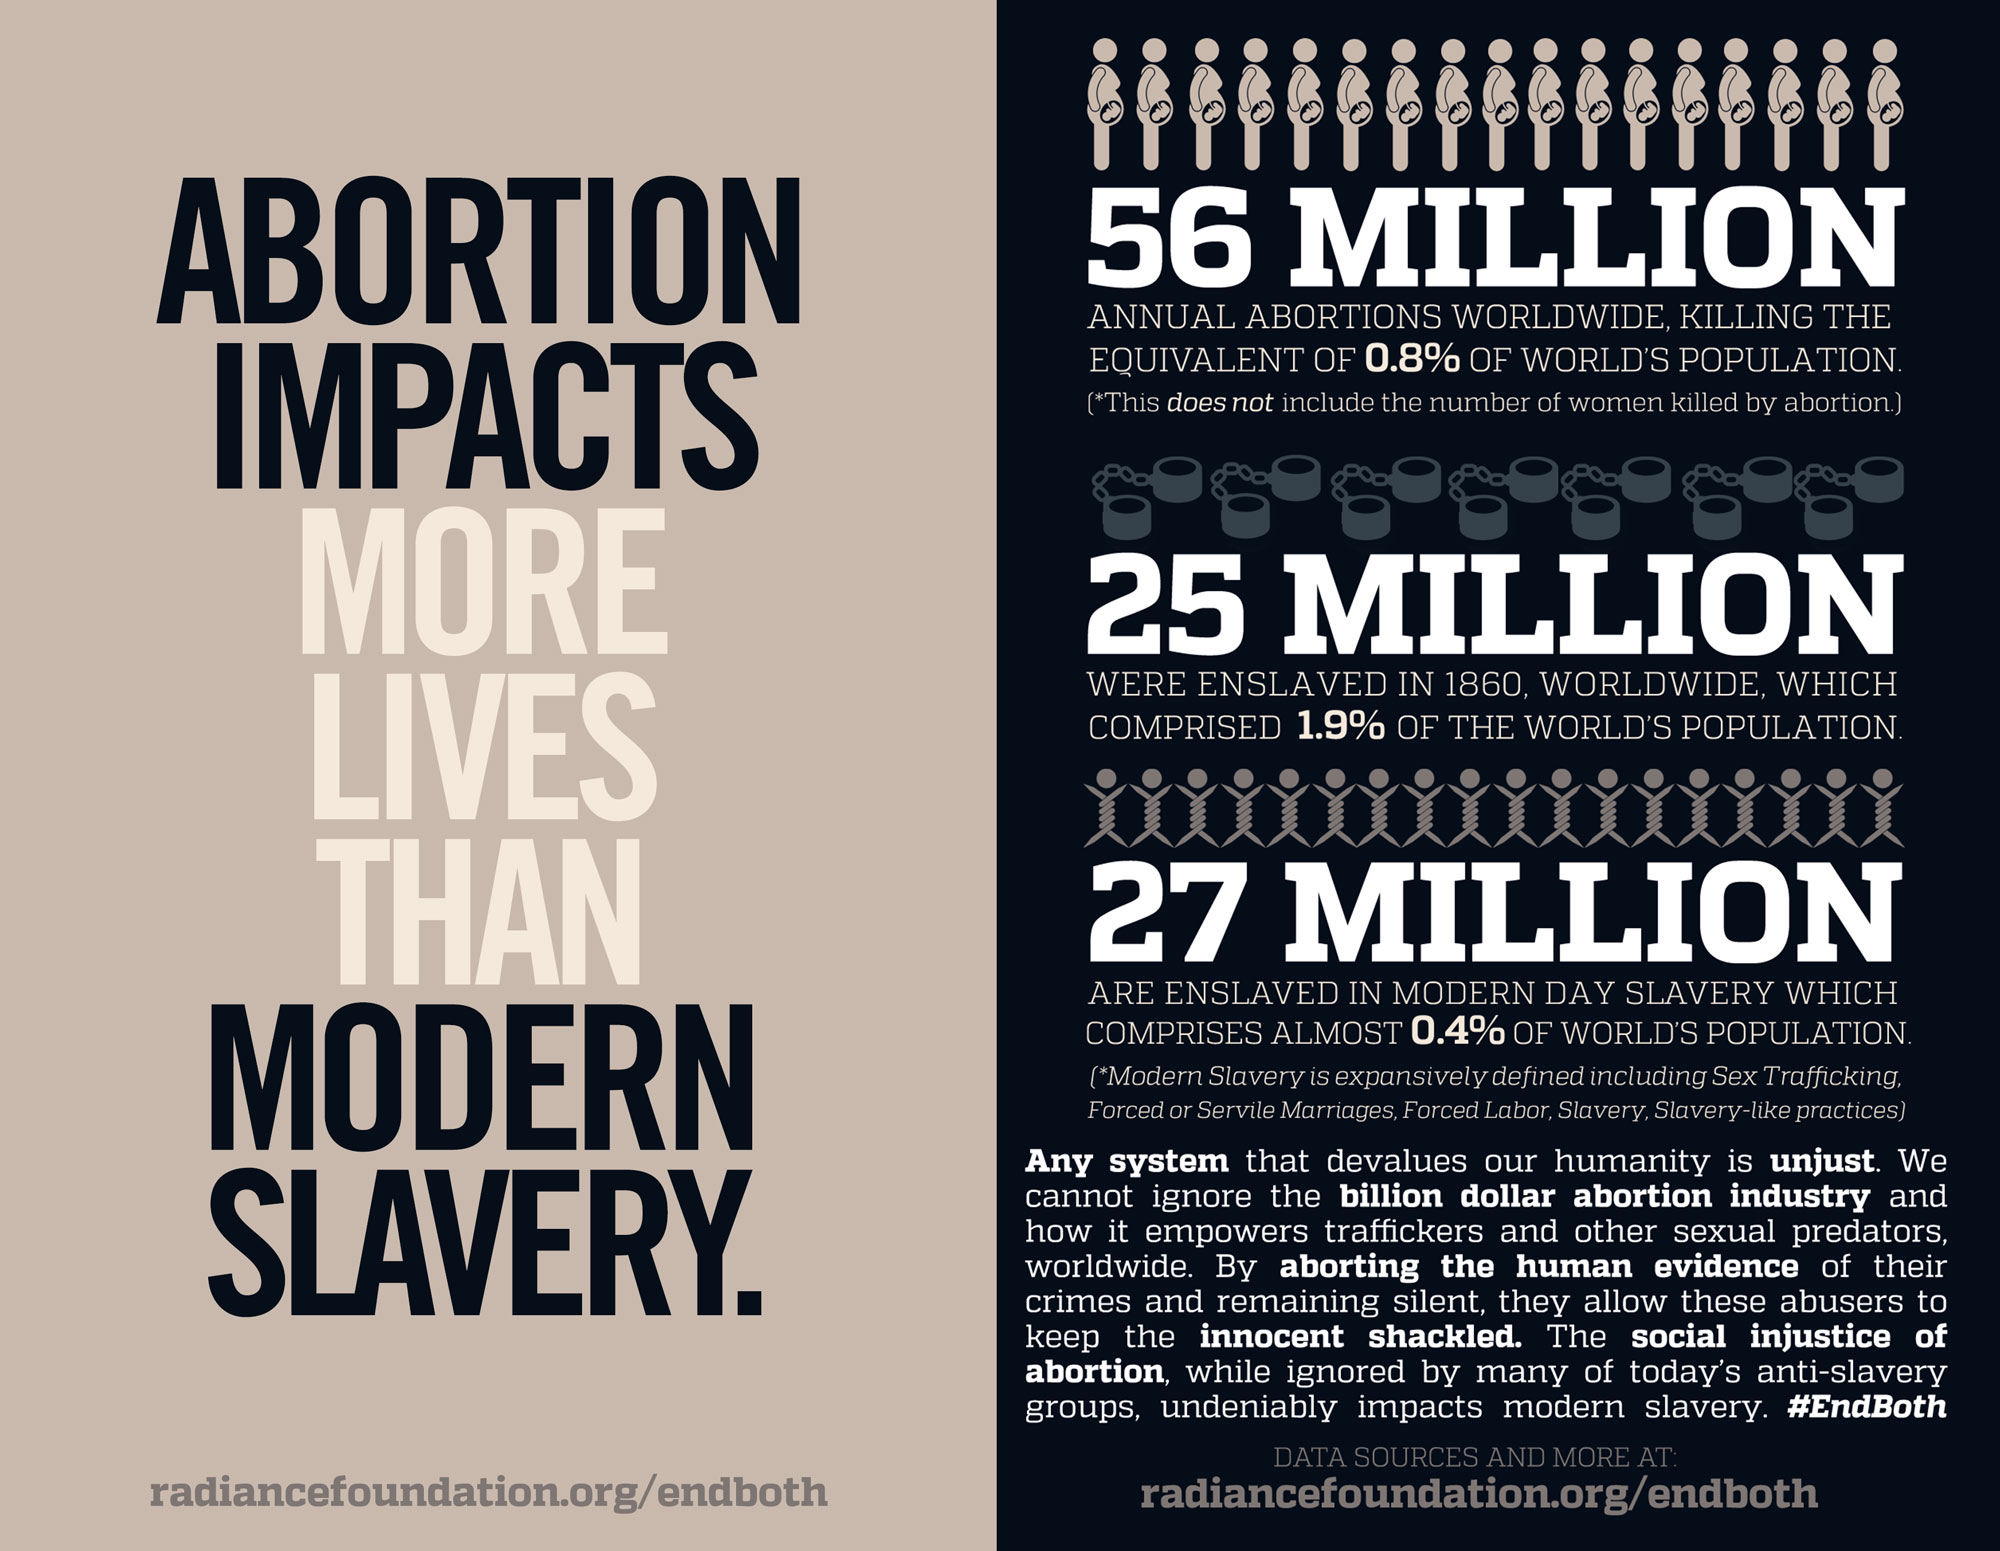 "ABORTION IMPACTS MORE LIVES THAN MODERN SLAVERY" by The Radiance Foundation